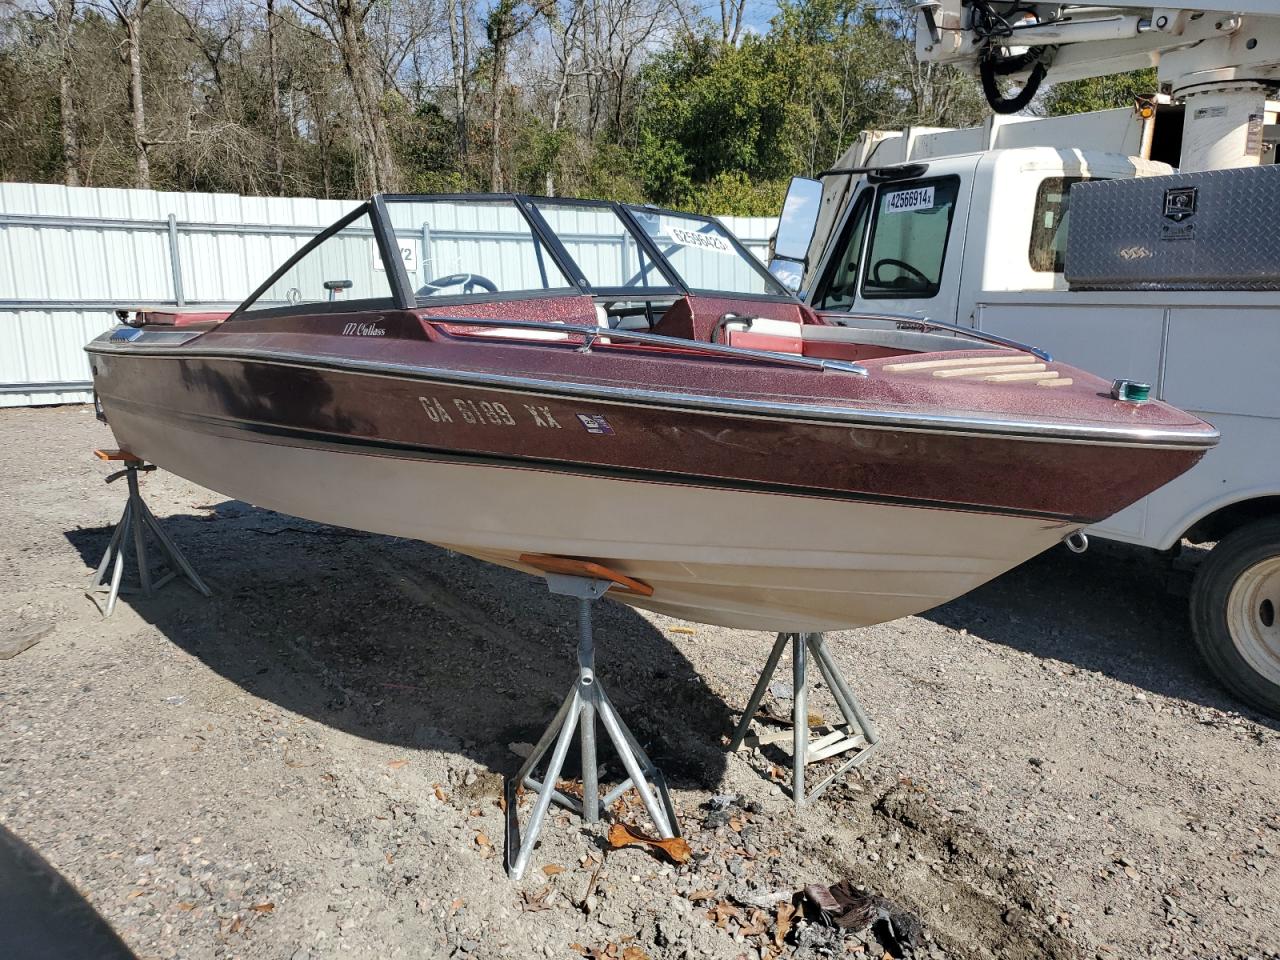 GSY156**** 1986 Glas Boat Only